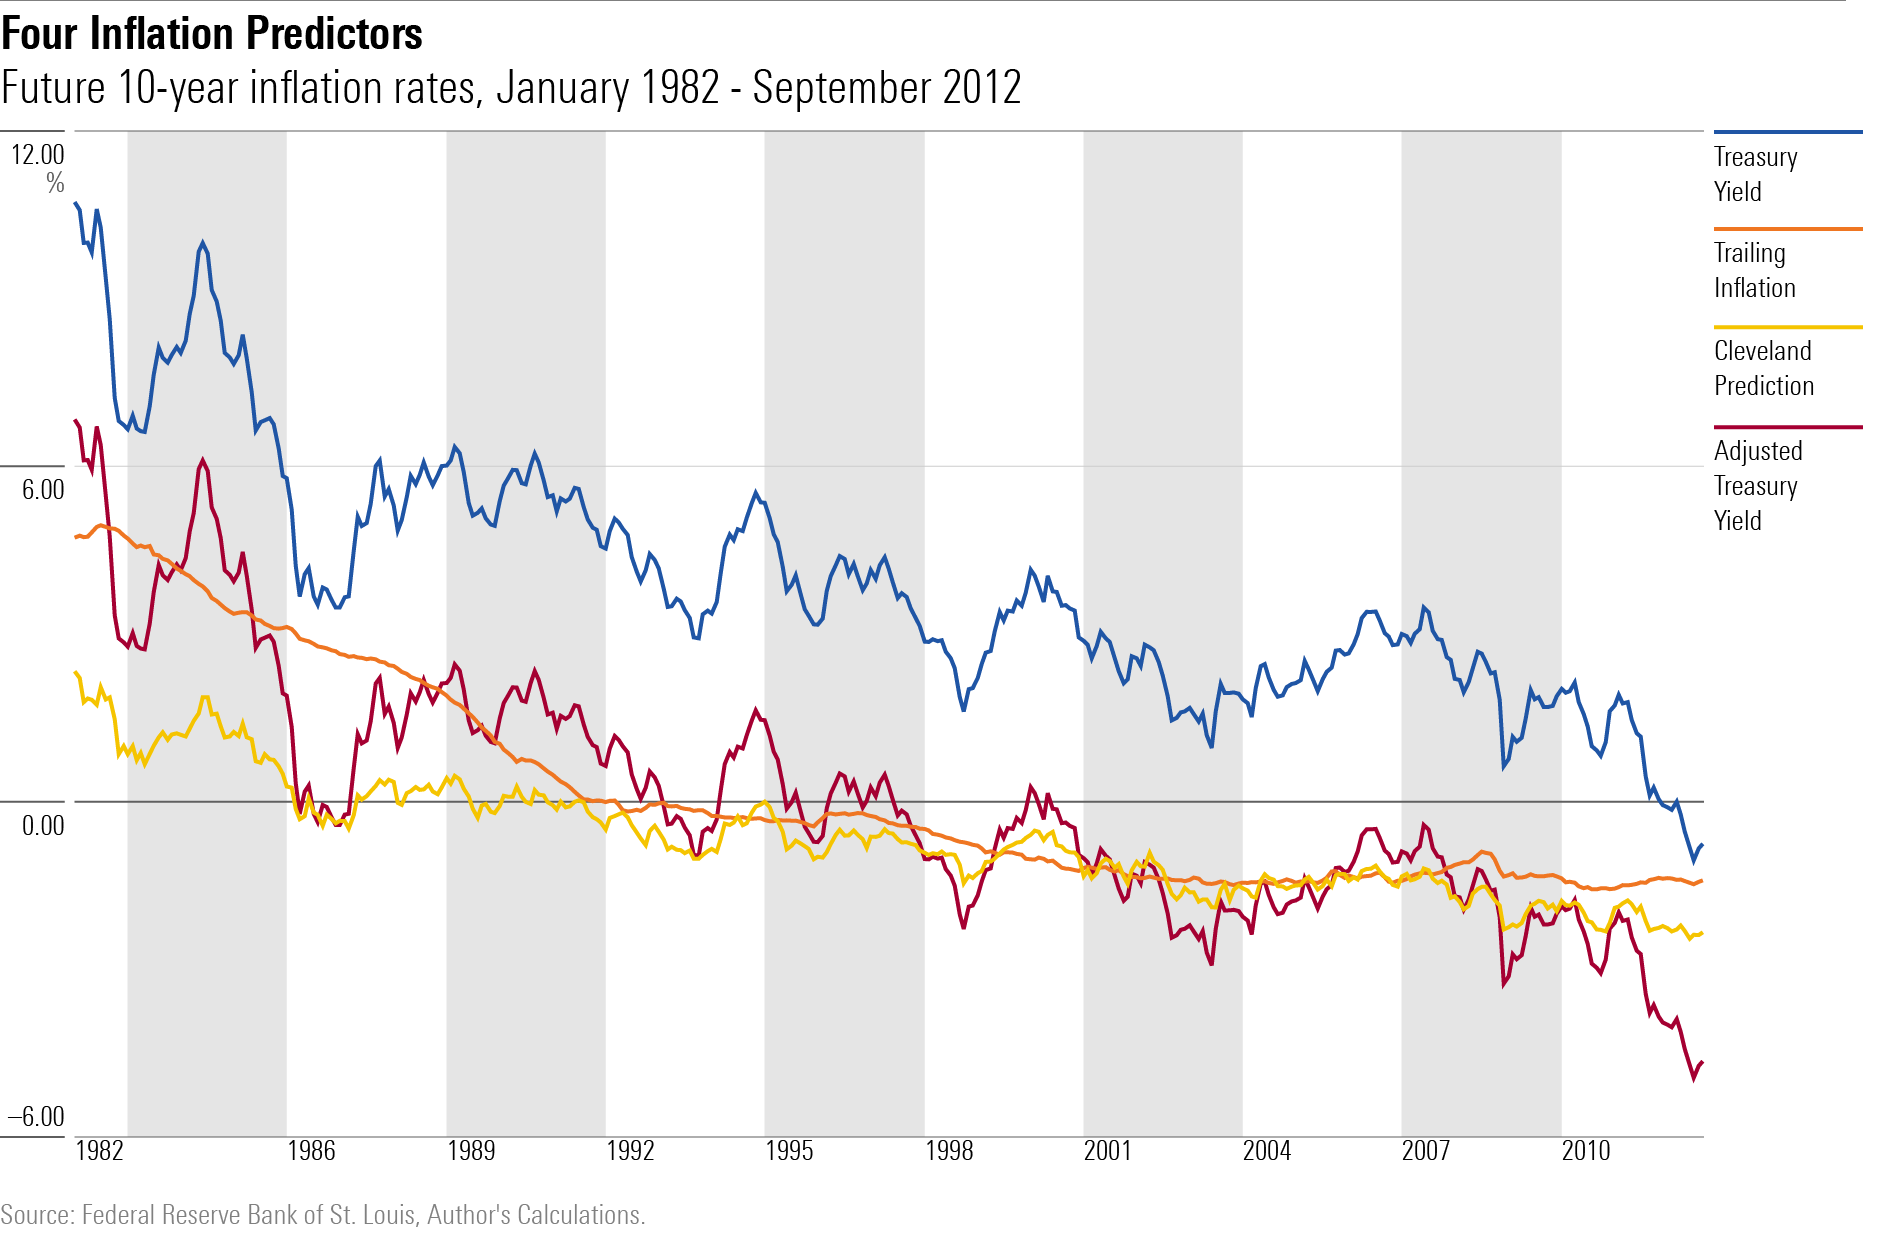 The difference in monthly values between what four predictors of inflation showed and what the next 10 years' inflation rate actually was, from January 1982 through September 2012.